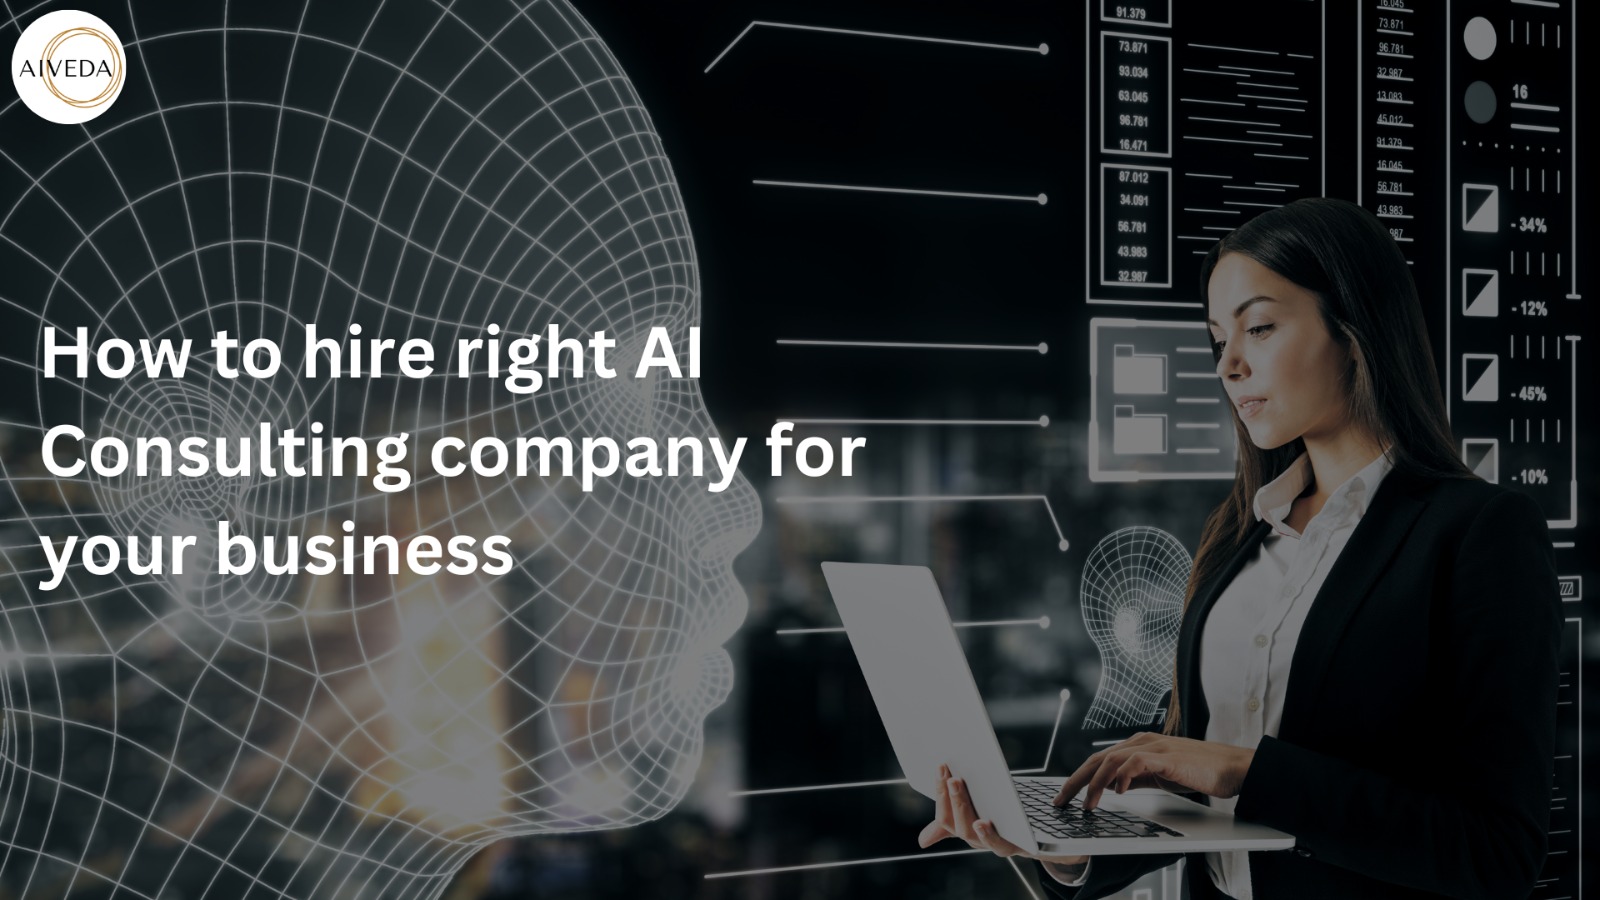 How to hire right AI Consulting company for your business?